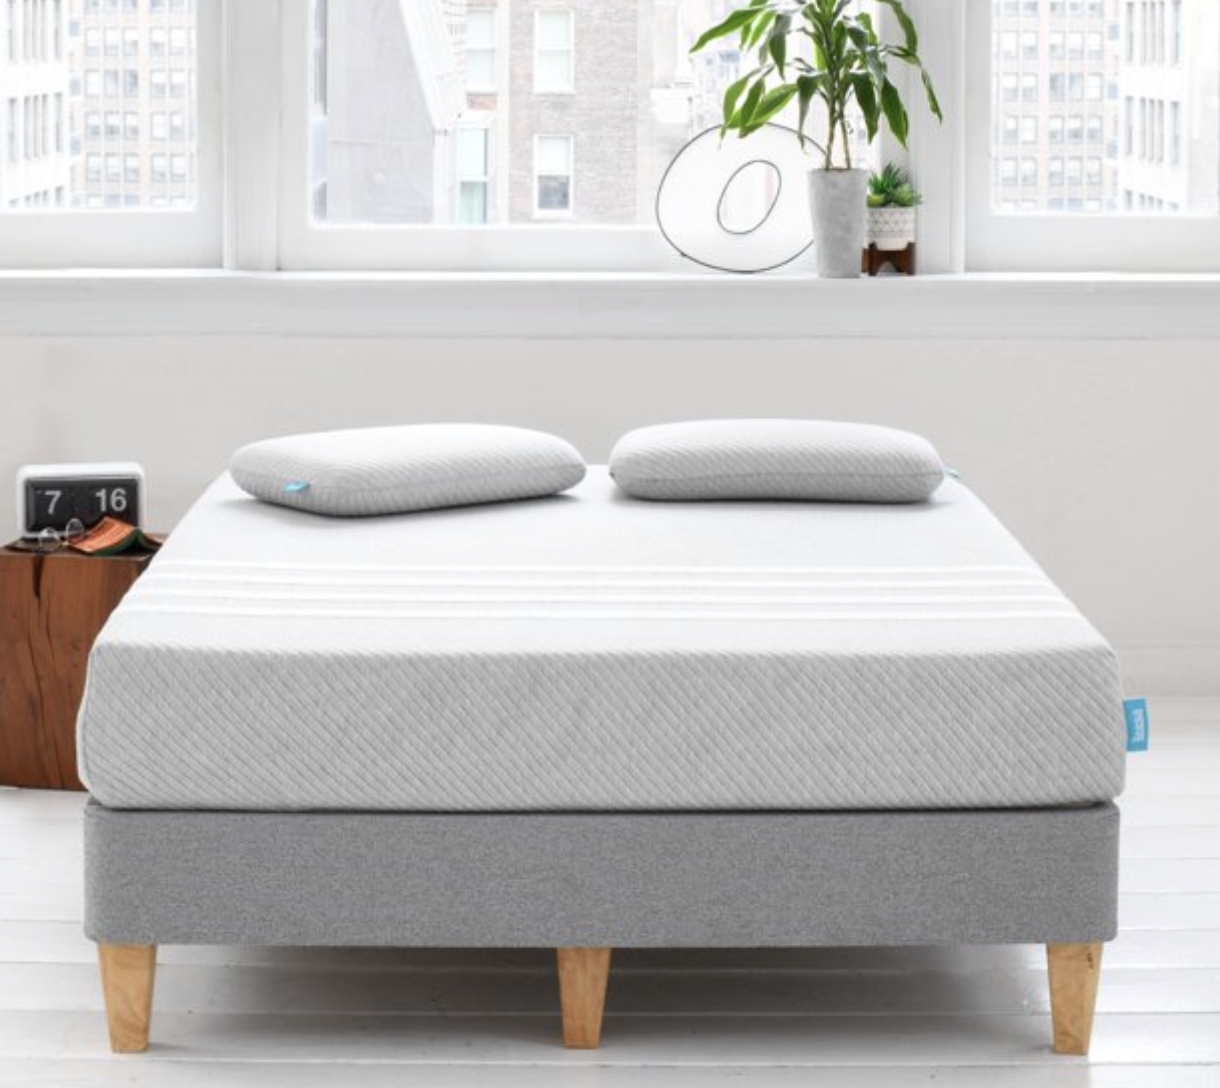 Find deals on mattresses for all type of sleepers. (Photo: Walmart)